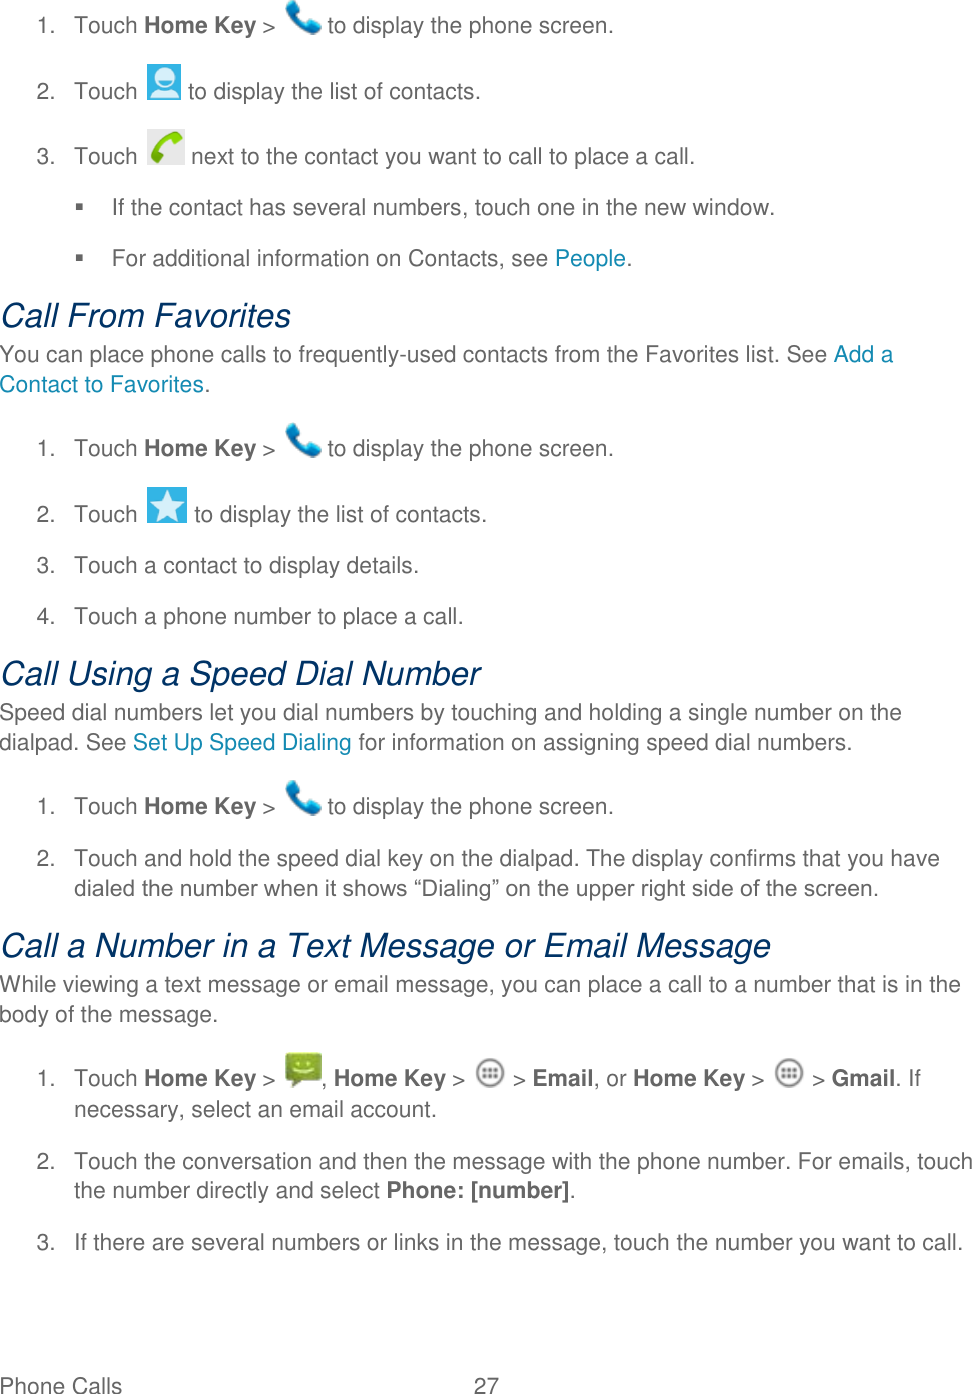 Phone Calls  27   1.  Touch Home Key &gt;   to display the phone screen. 2.  Touch   to display the list of contacts. 3.  Touch   next to the contact you want to call to place a call.   If the contact has several numbers, touch one in the new window.   For additional information on Contacts, see People. Call From Favorites You can place phone calls to frequently-used contacts from the Favorites list. See Add a Contact to Favorites. 1.  Touch Home Key &gt;   to display the phone screen. 2.  Touch   to display the list of contacts. 3.  Touch a contact to display details. 4.  Touch a phone number to place a call.  Call Using a Speed Dial Number Speed dial numbers let you dial numbers by touching and holding a single number on the dialpad. See Set Up Speed Dialing for information on assigning speed dial numbers. 1.  Touch Home Key &gt;   to display the phone screen. 2.  Touch and hold the speed dial key on the dialpad. The display confirms that you have dialed the number when it shows “Dialing” on the upper right side of the screen. Call a Number in a Text Message or Email Message While viewing a text message or email message, you can place a call to a number that is in the body of the message.  1.  Touch Home Key &gt;  , Home Key &gt;   &gt; Email, or Home Key &gt;   &gt; Gmail. If necessary, select an email account. 2.  Touch the conversation and then the message with the phone number. For emails, touch the number directly and select Phone: [number]. 3.  If there are several numbers or links in the message, touch the number you want to call. 